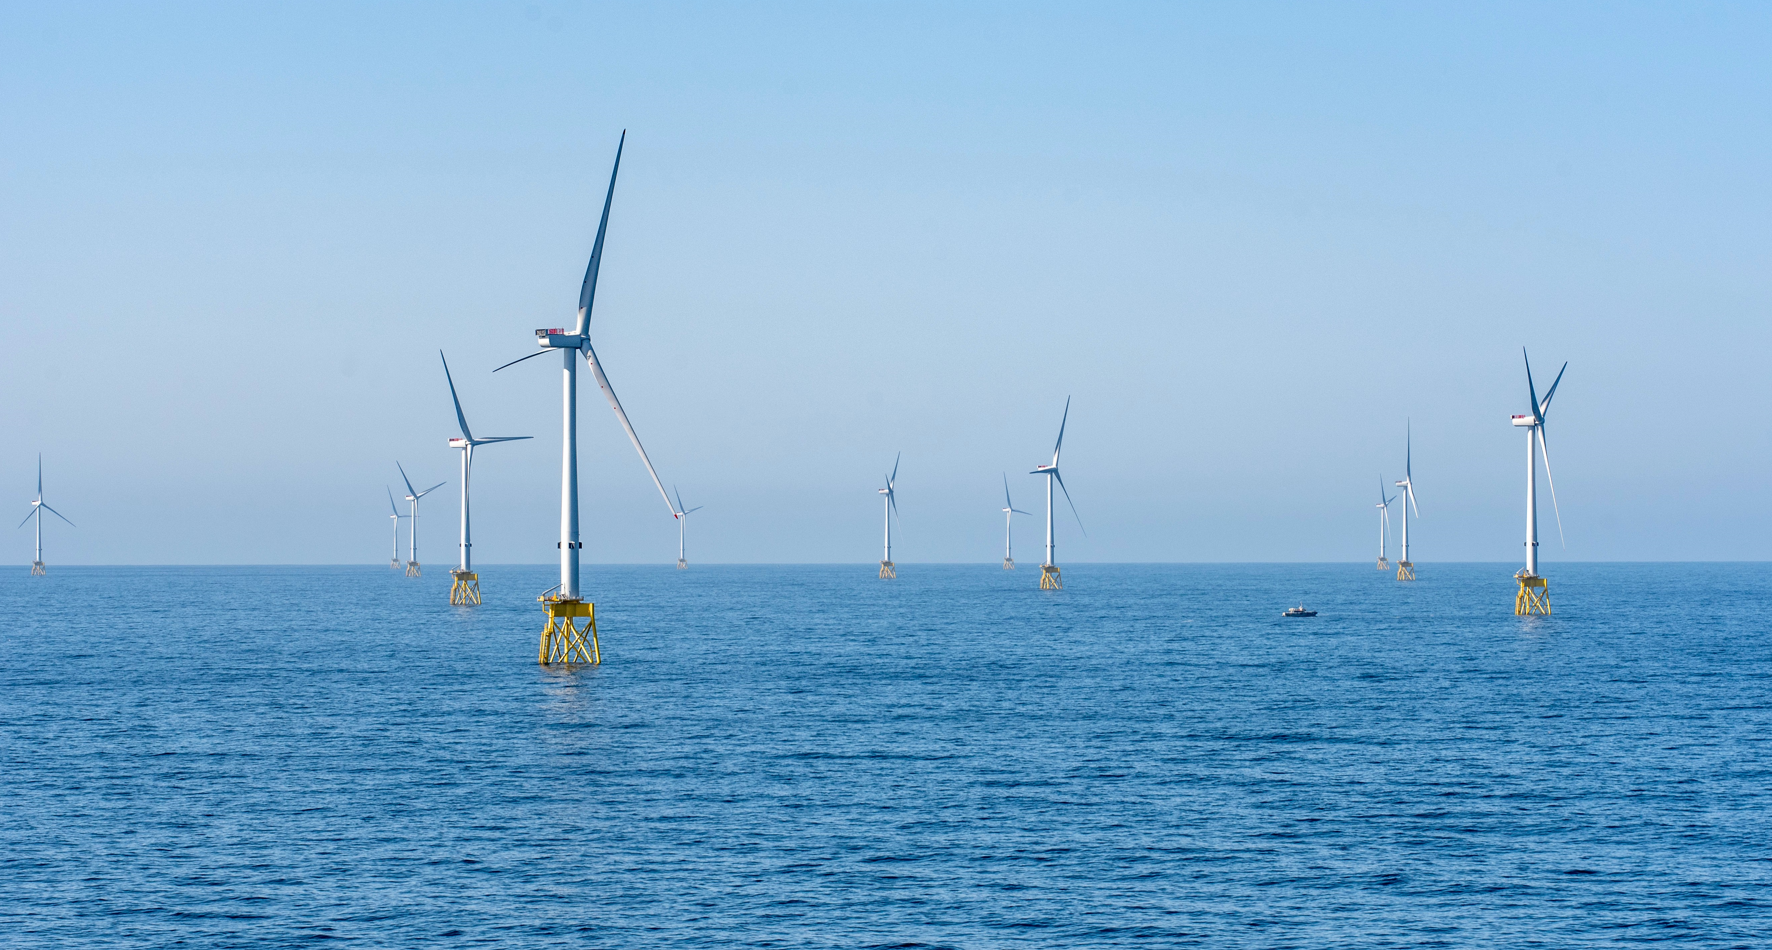 Seagreen offshore wind farm fully operational